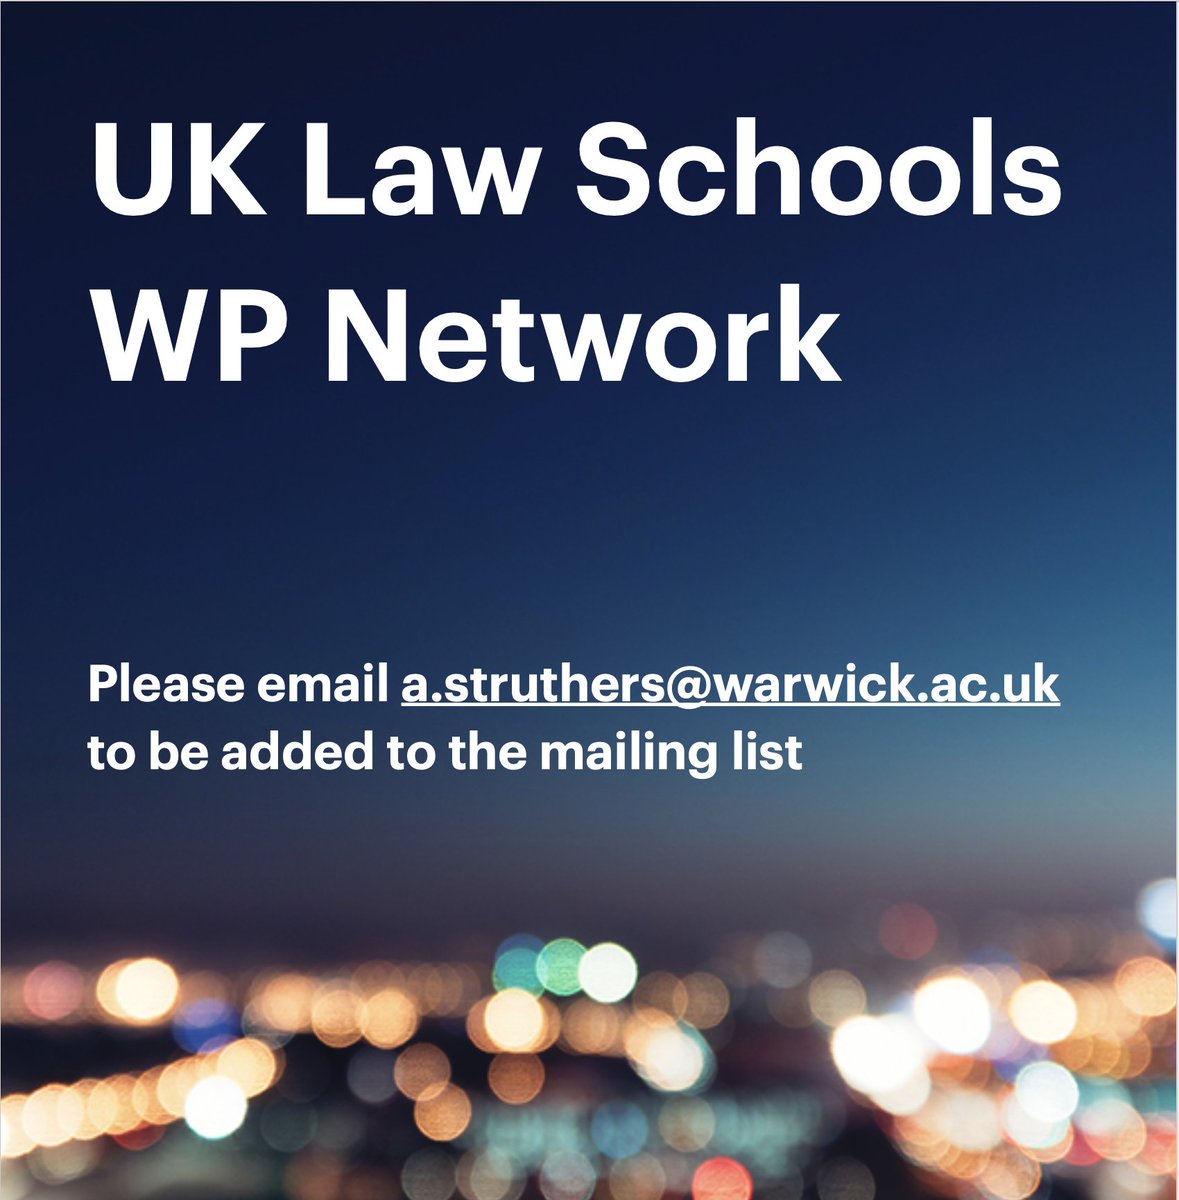 If anyone would like to present at the next meeting of the UK Law Schools WP Network, please do drop me an email. Anyone working on anything that they'd like to talk about/get feedback on? Or have any students who are doing so? Ideally, we'd have a meeting in early December 👍